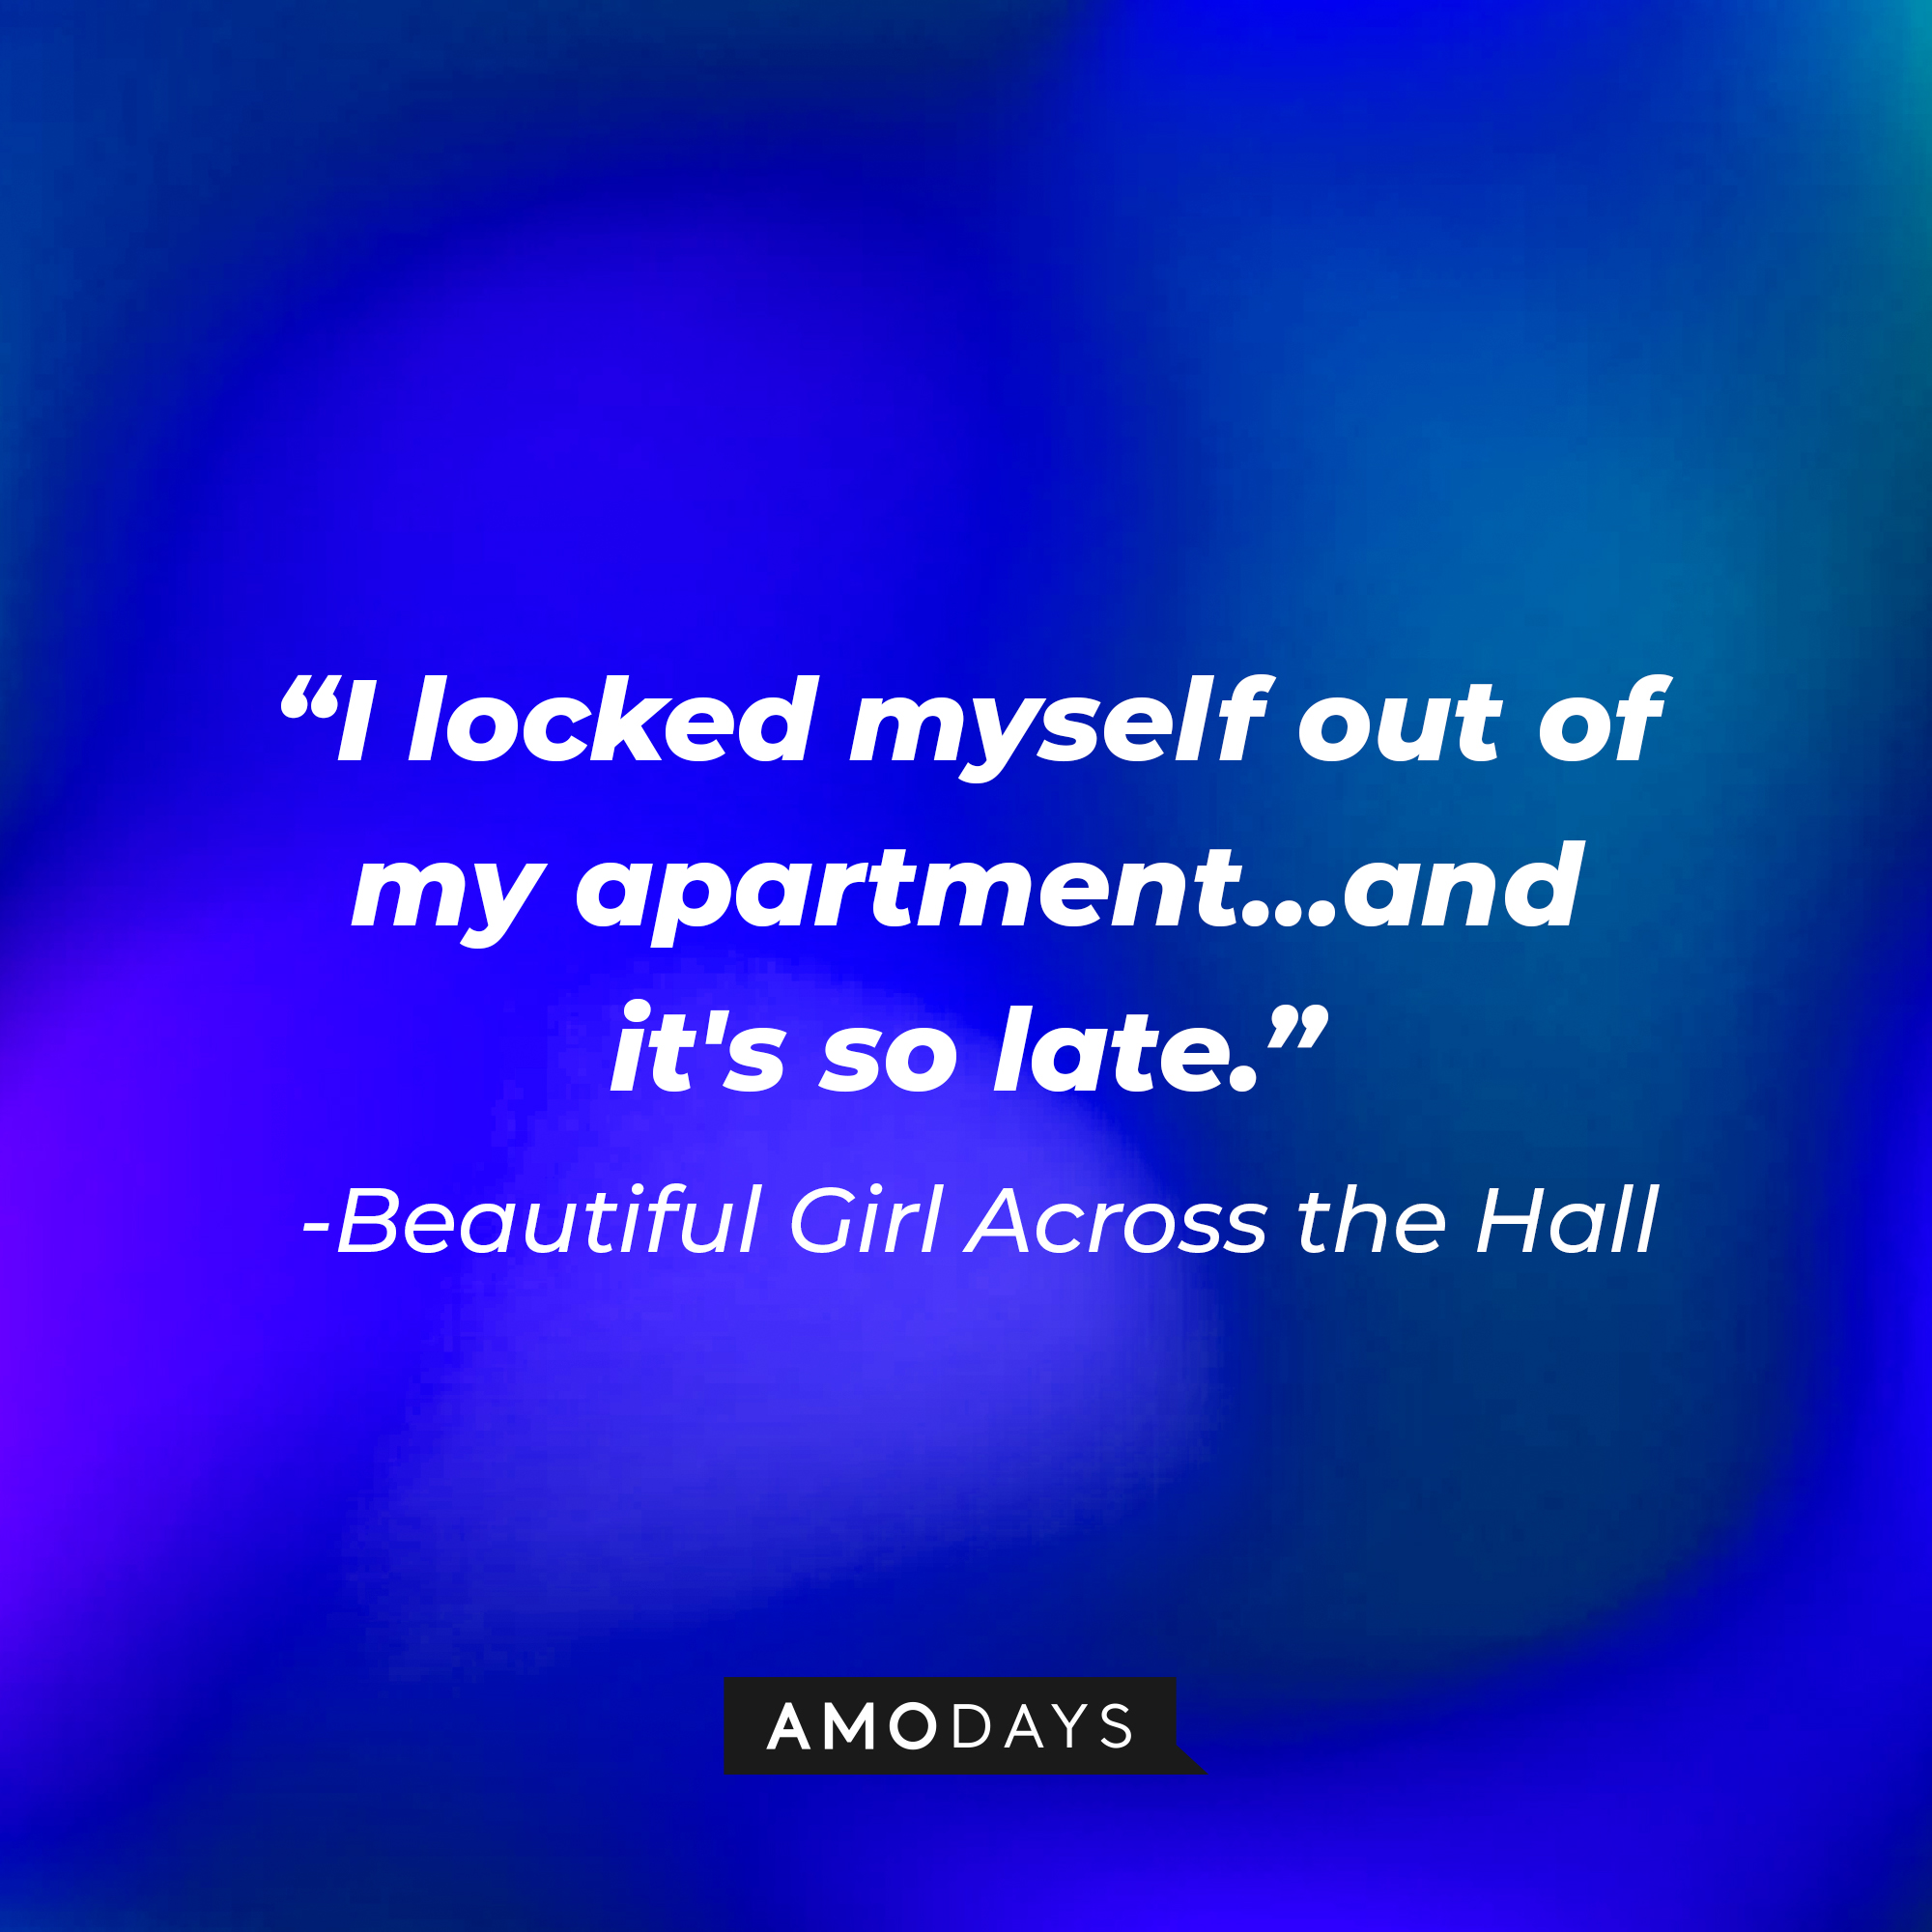 Beautiful Girl Across the Hall’s quote: “I locked myself out of my apartment…and it's so late.” | Source: AmoDays